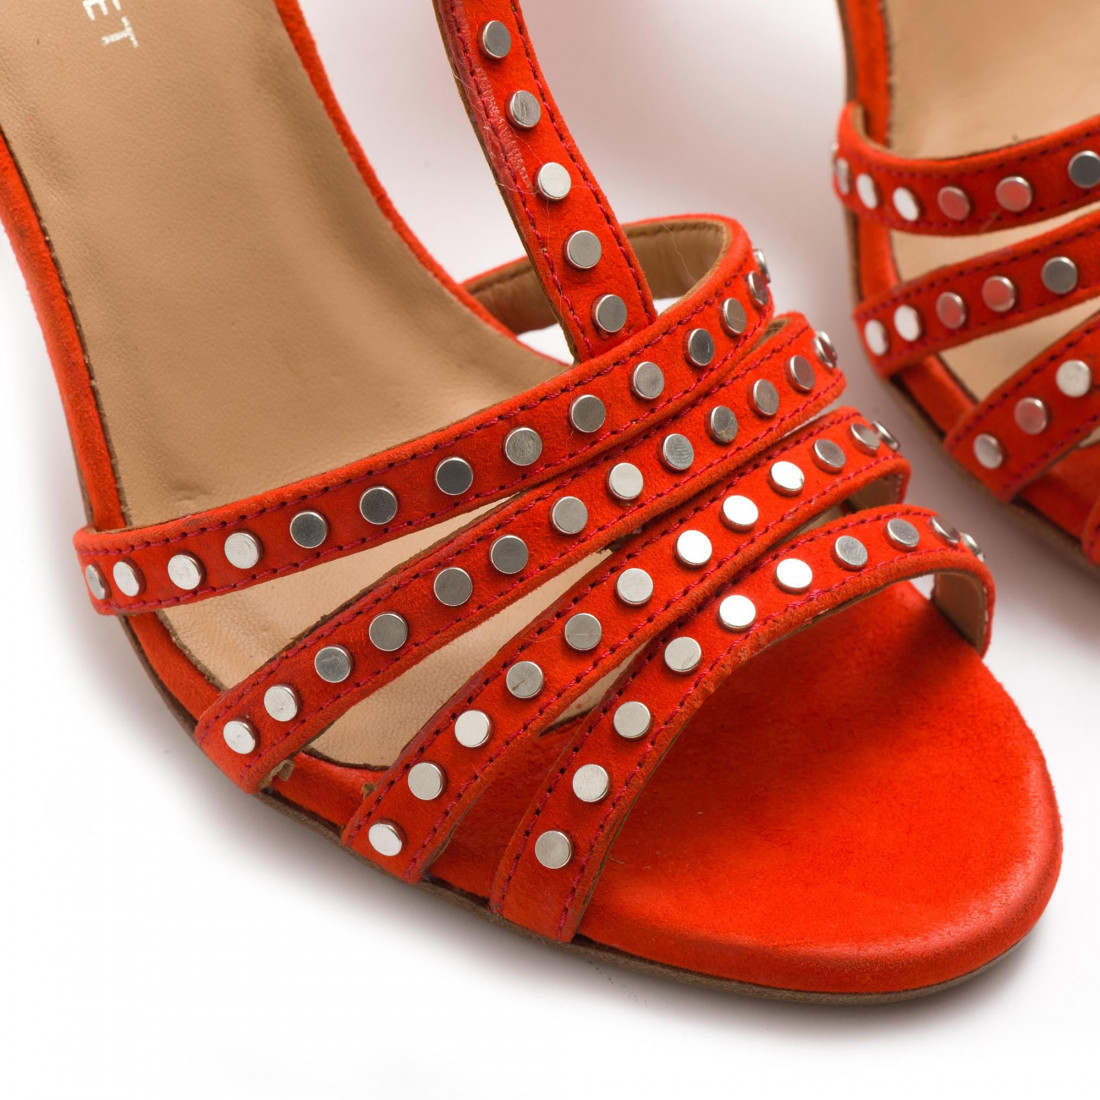 Lalla Medium heel sandals in red leather with studs